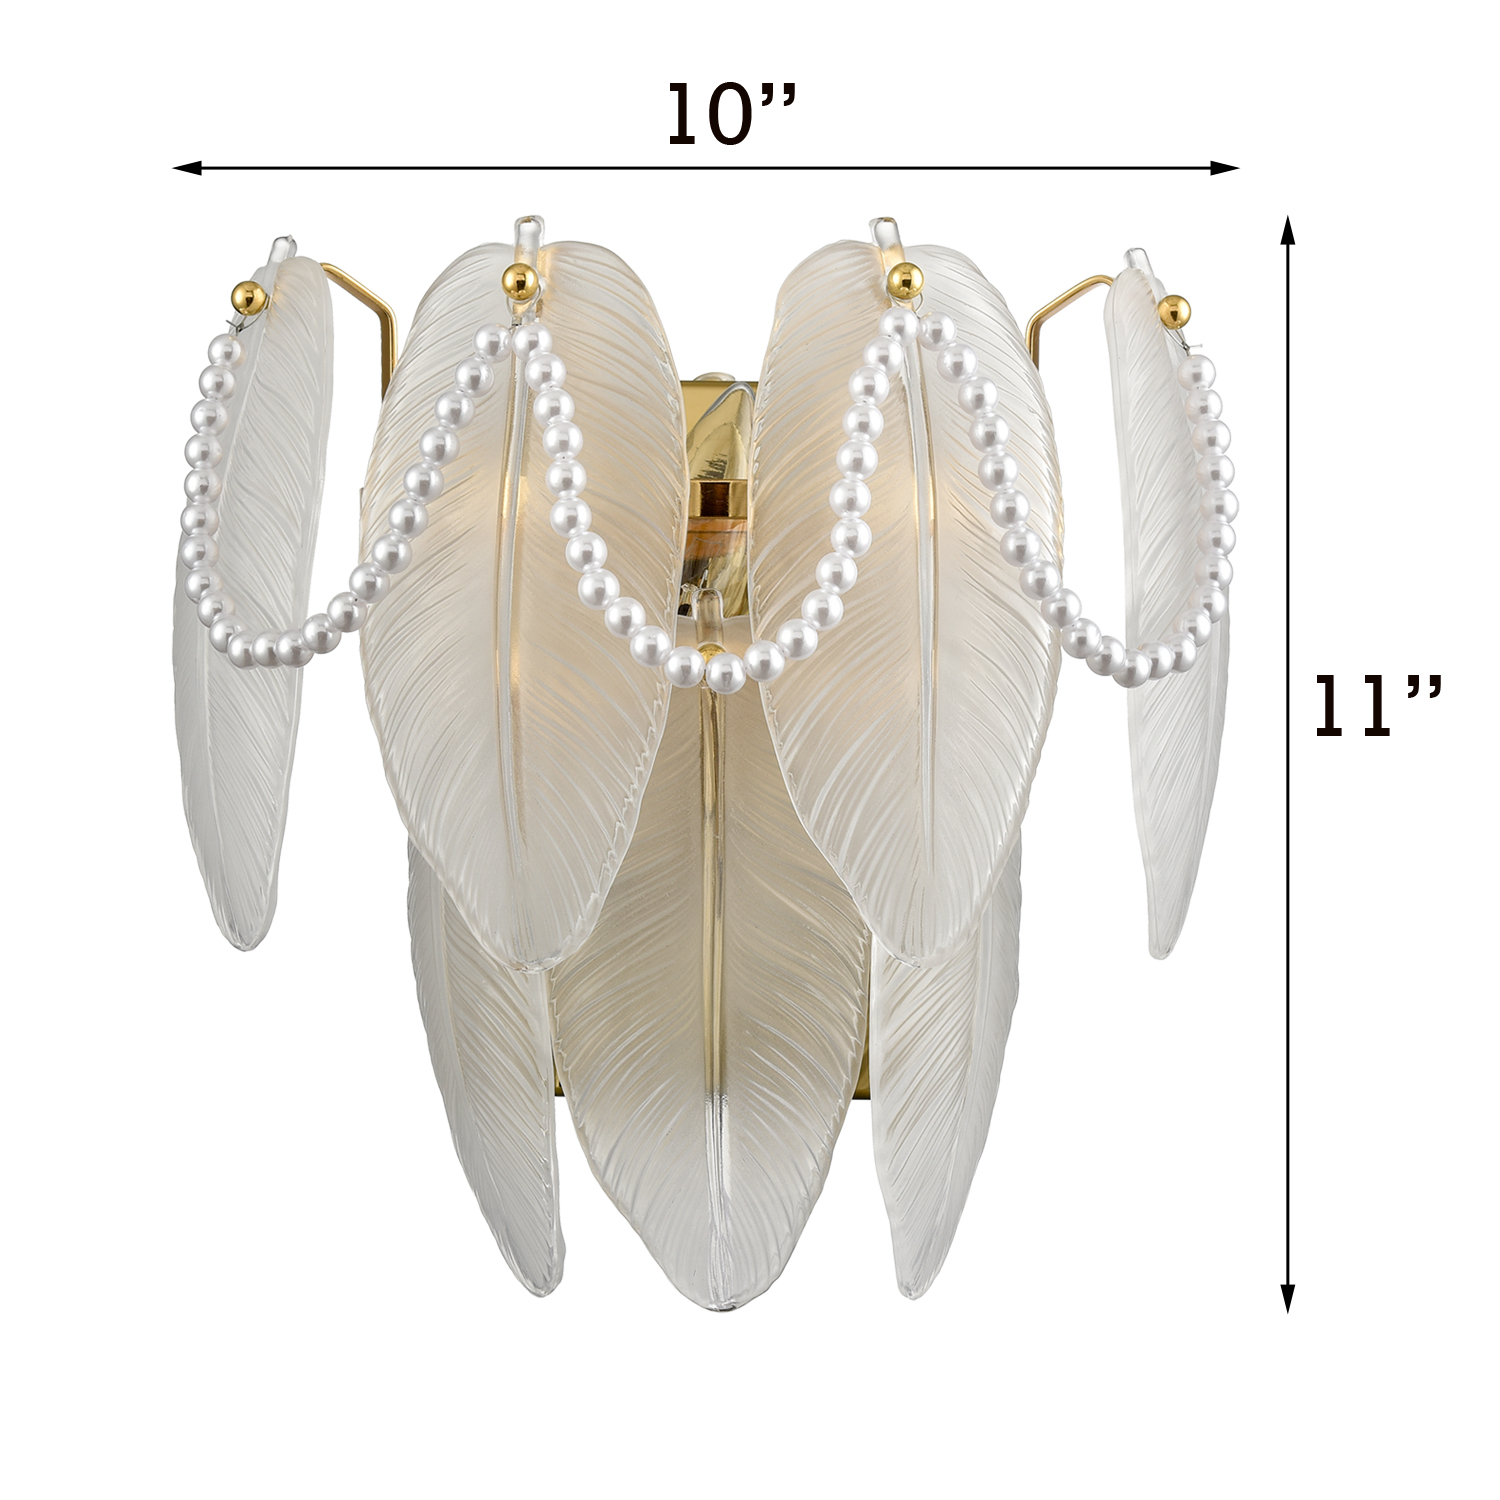 Vintage Wall Light Retro Wall Sconce 2-Light with Leaf Shape Frosted Glass and White Beads